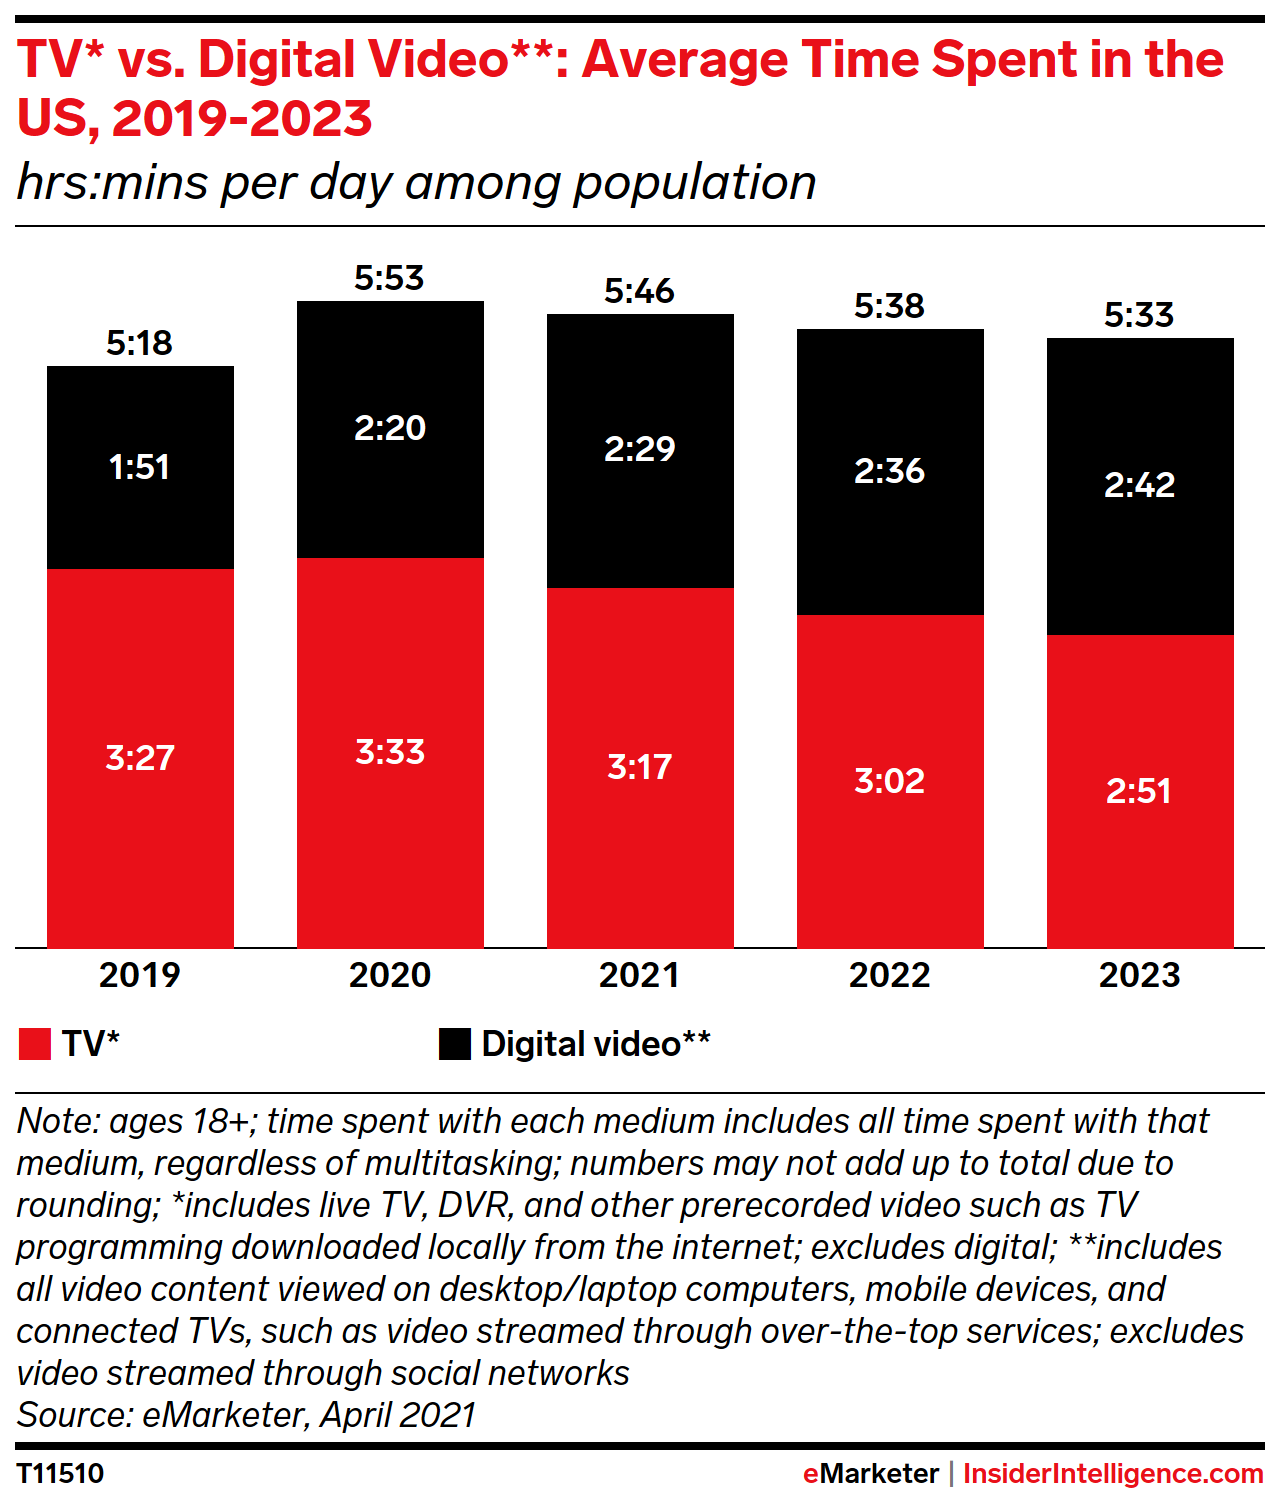 TV* vs. Digital Video**: Average Time Spent in the US, 2019-2023 (hrs:mins per day among population)